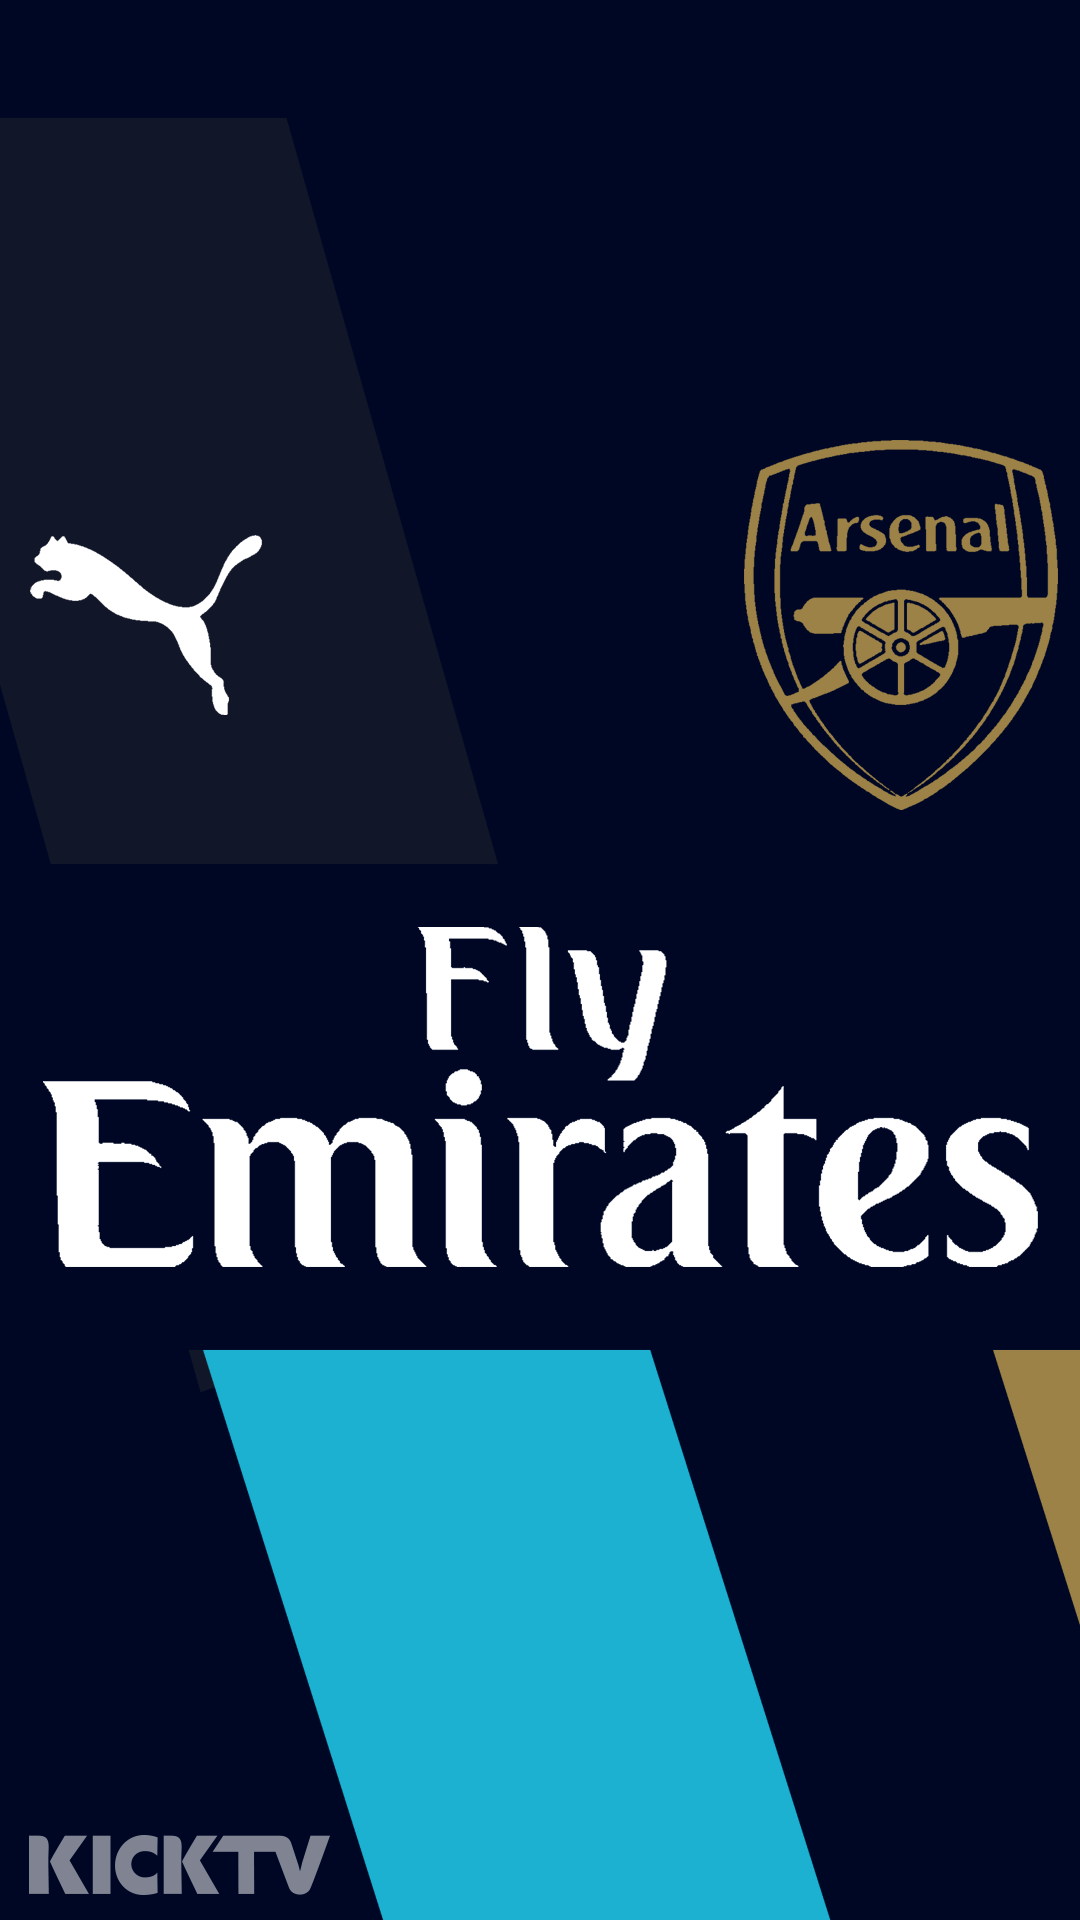 Pin on Wallpapers from Arsenal's Kit